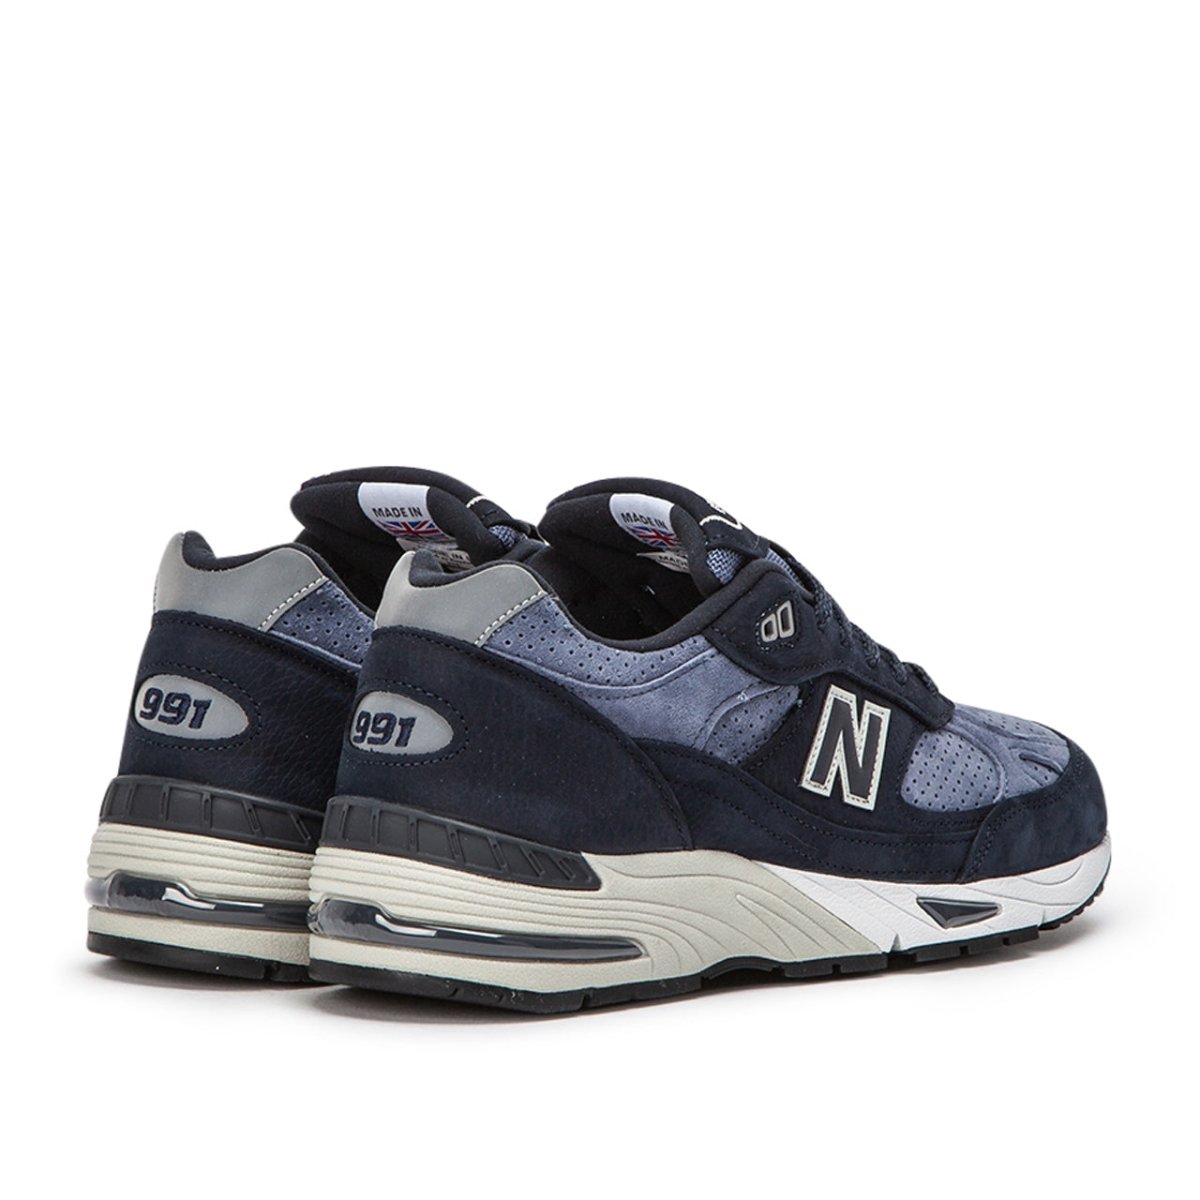 New Balance M991 NVB 'Made in England' (Navy)  - Allike Store